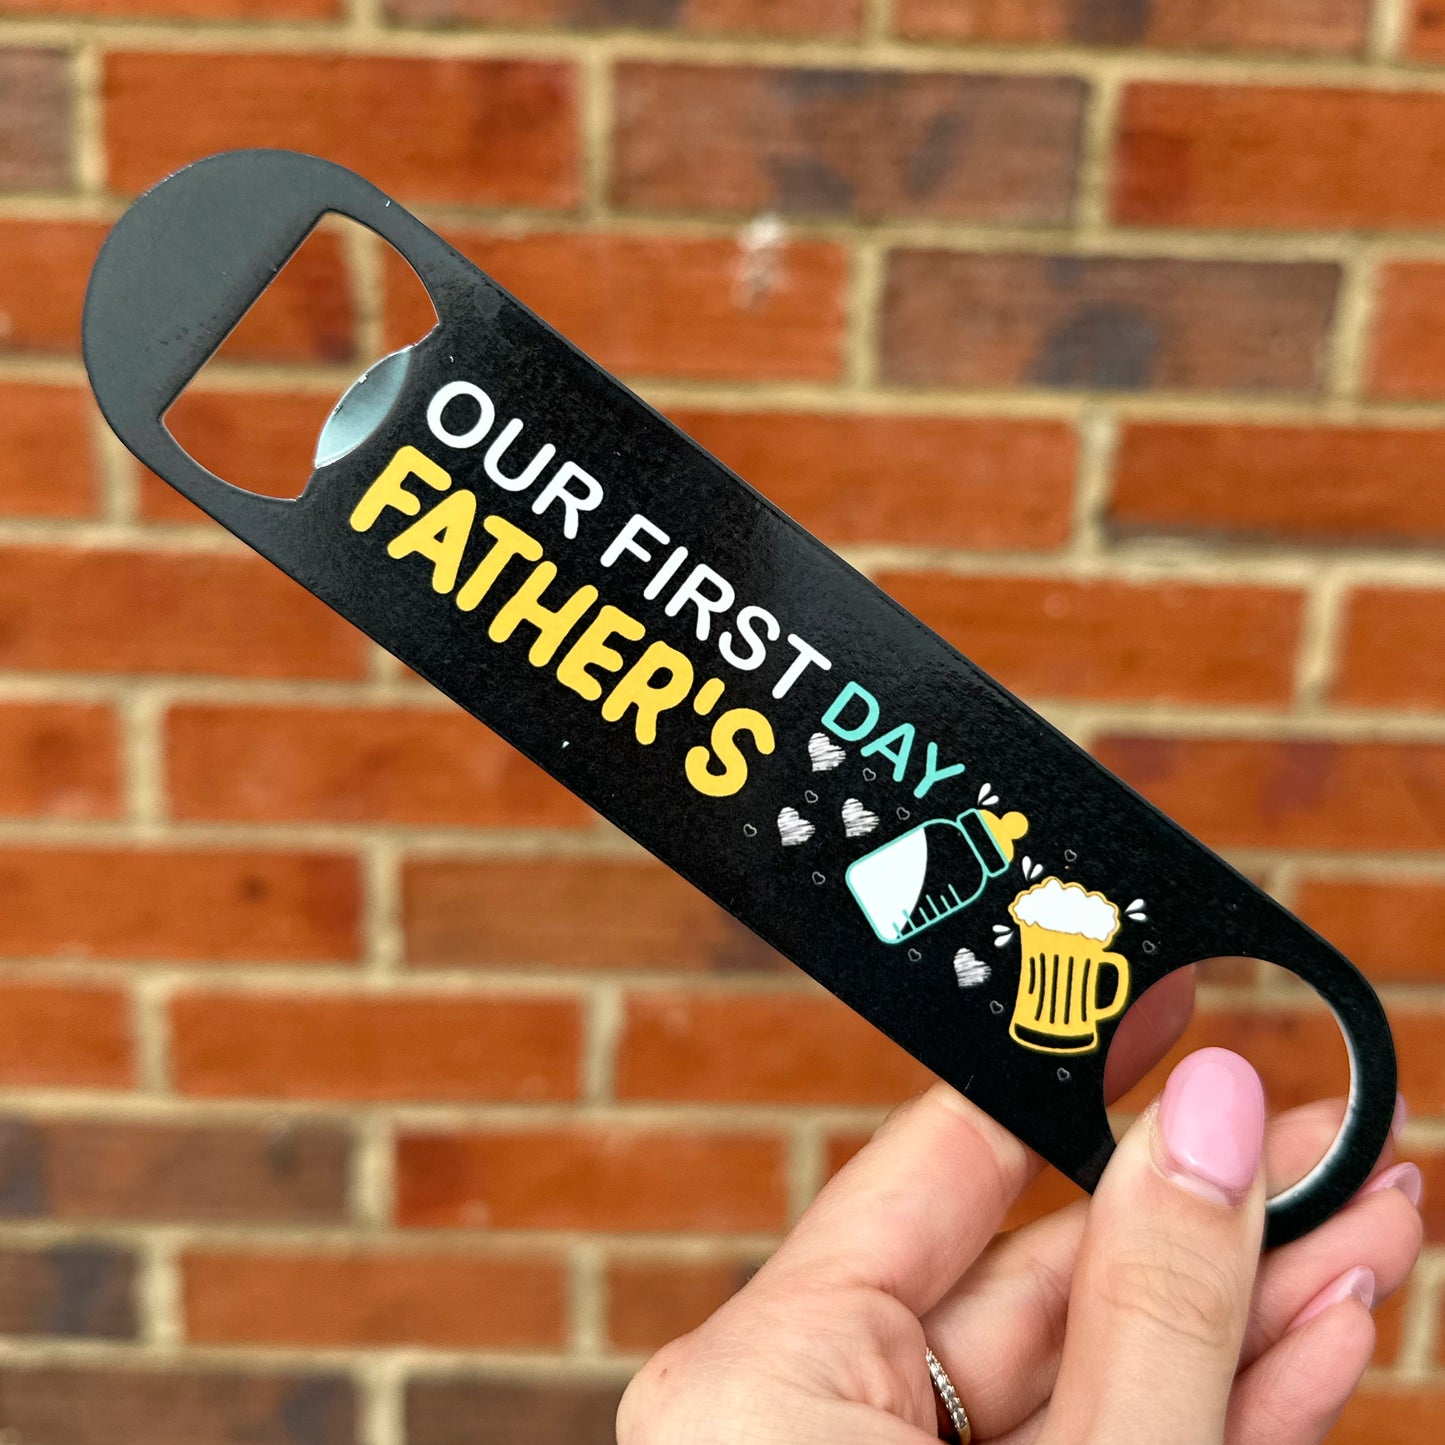 Our First Fathers Day Bottle Opener